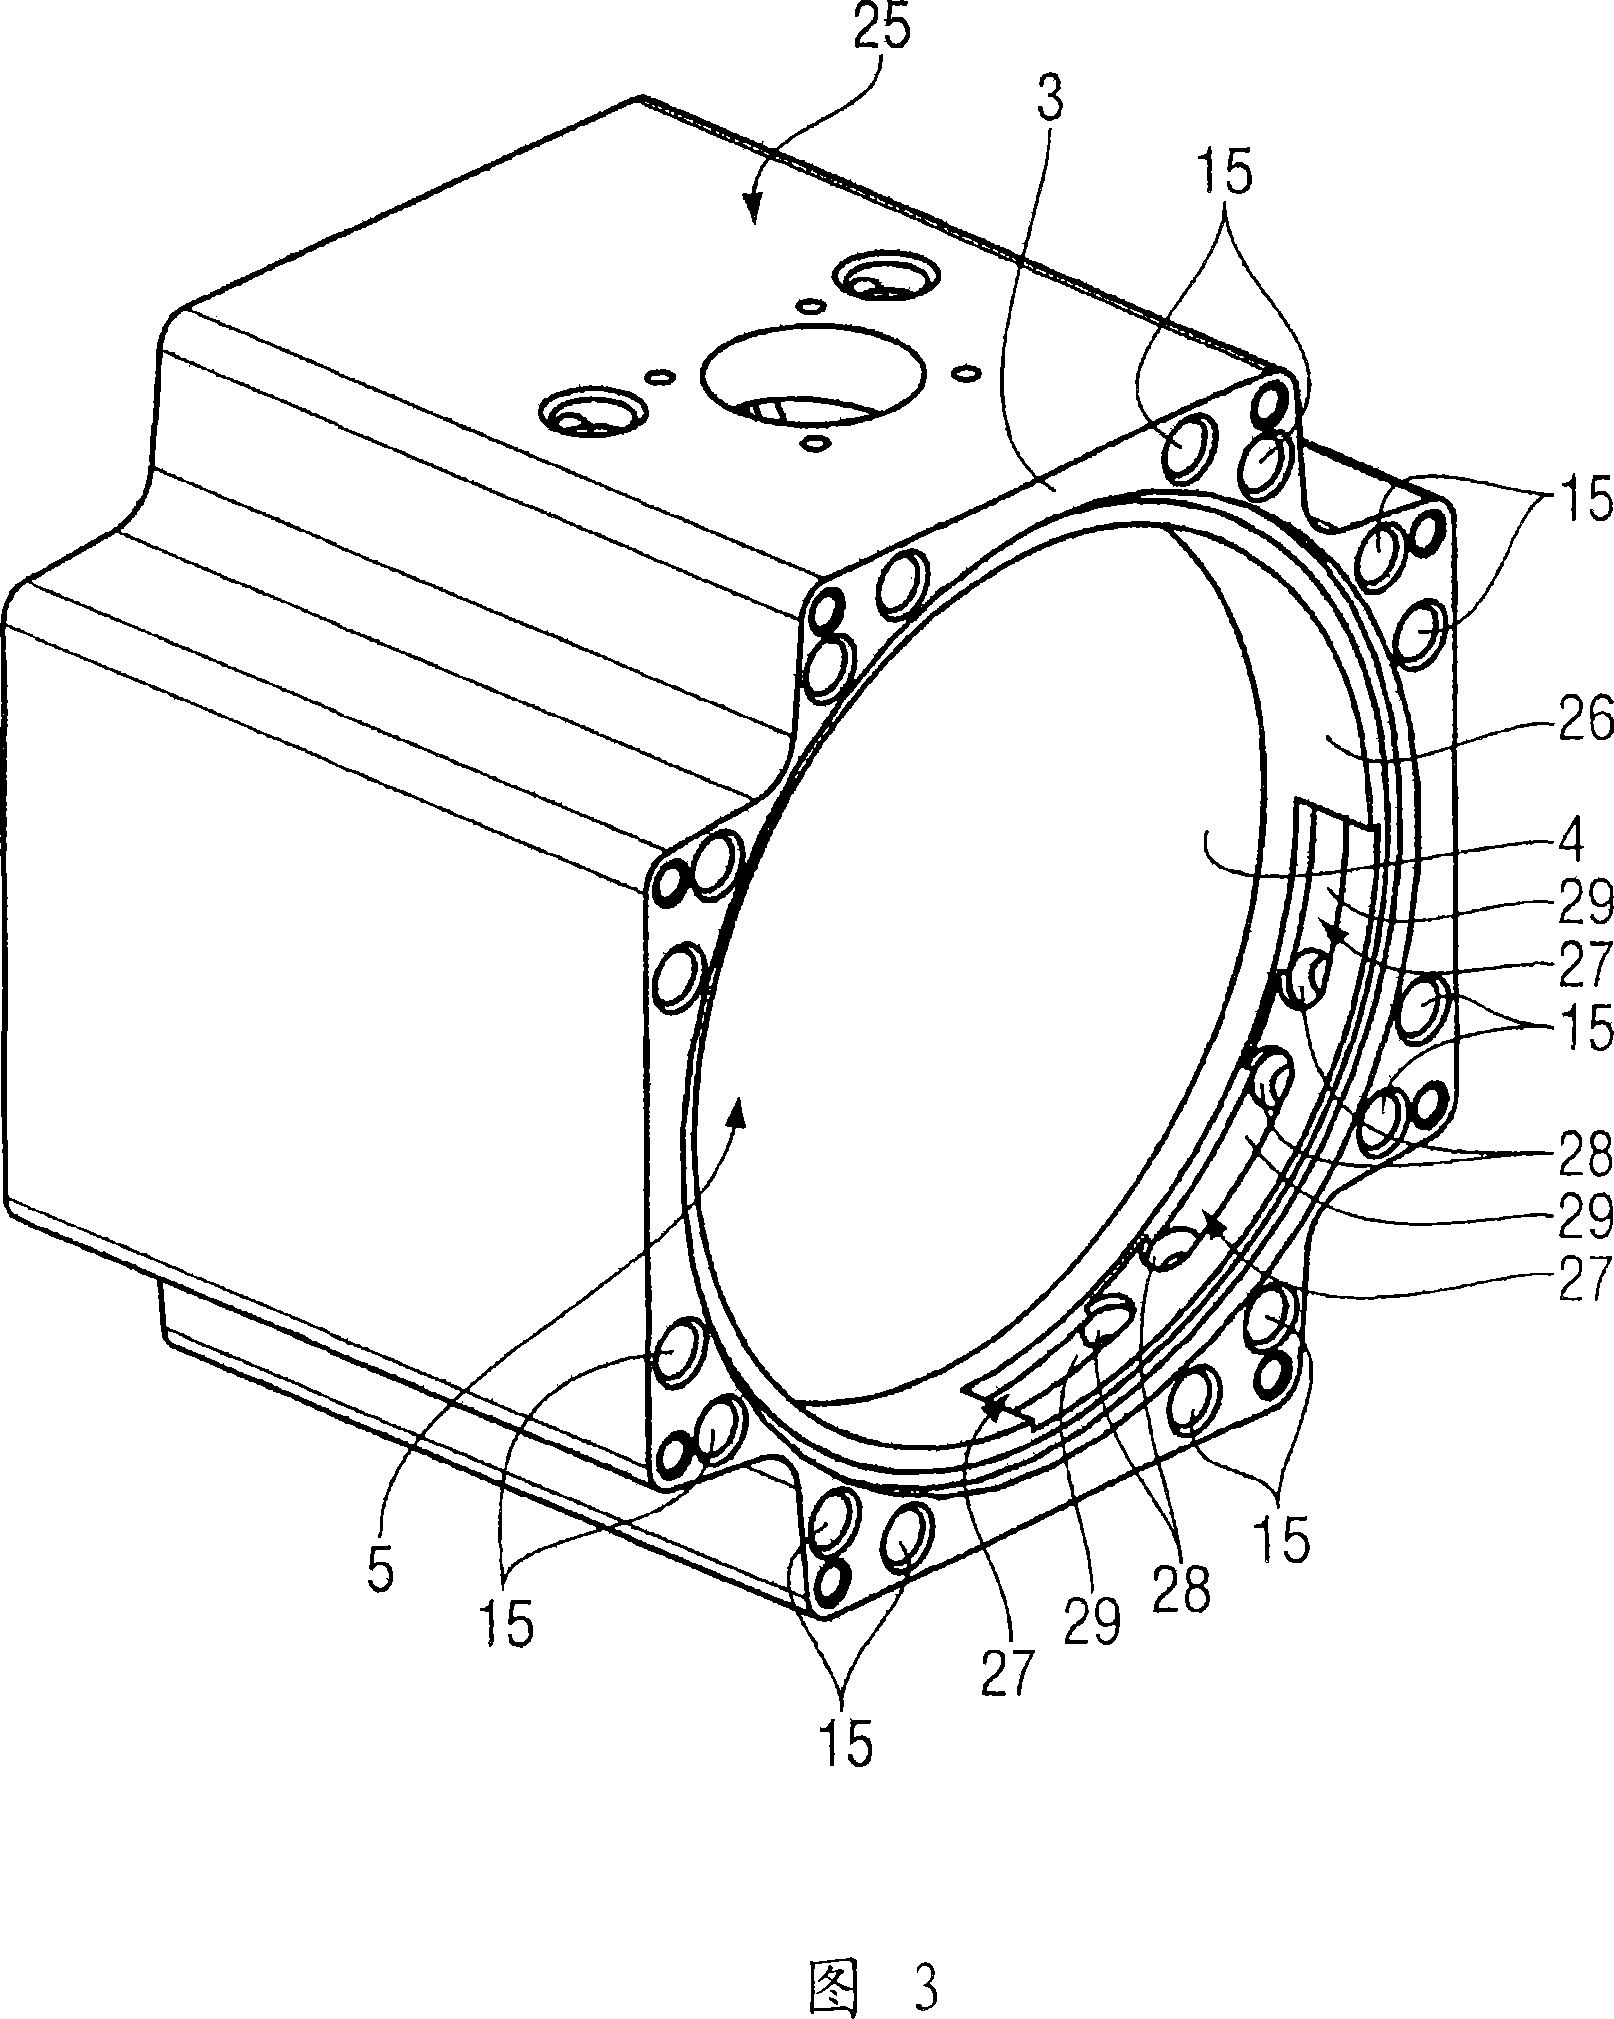 Housing of an electrical machine comprising cooling channels extending in a housing wall